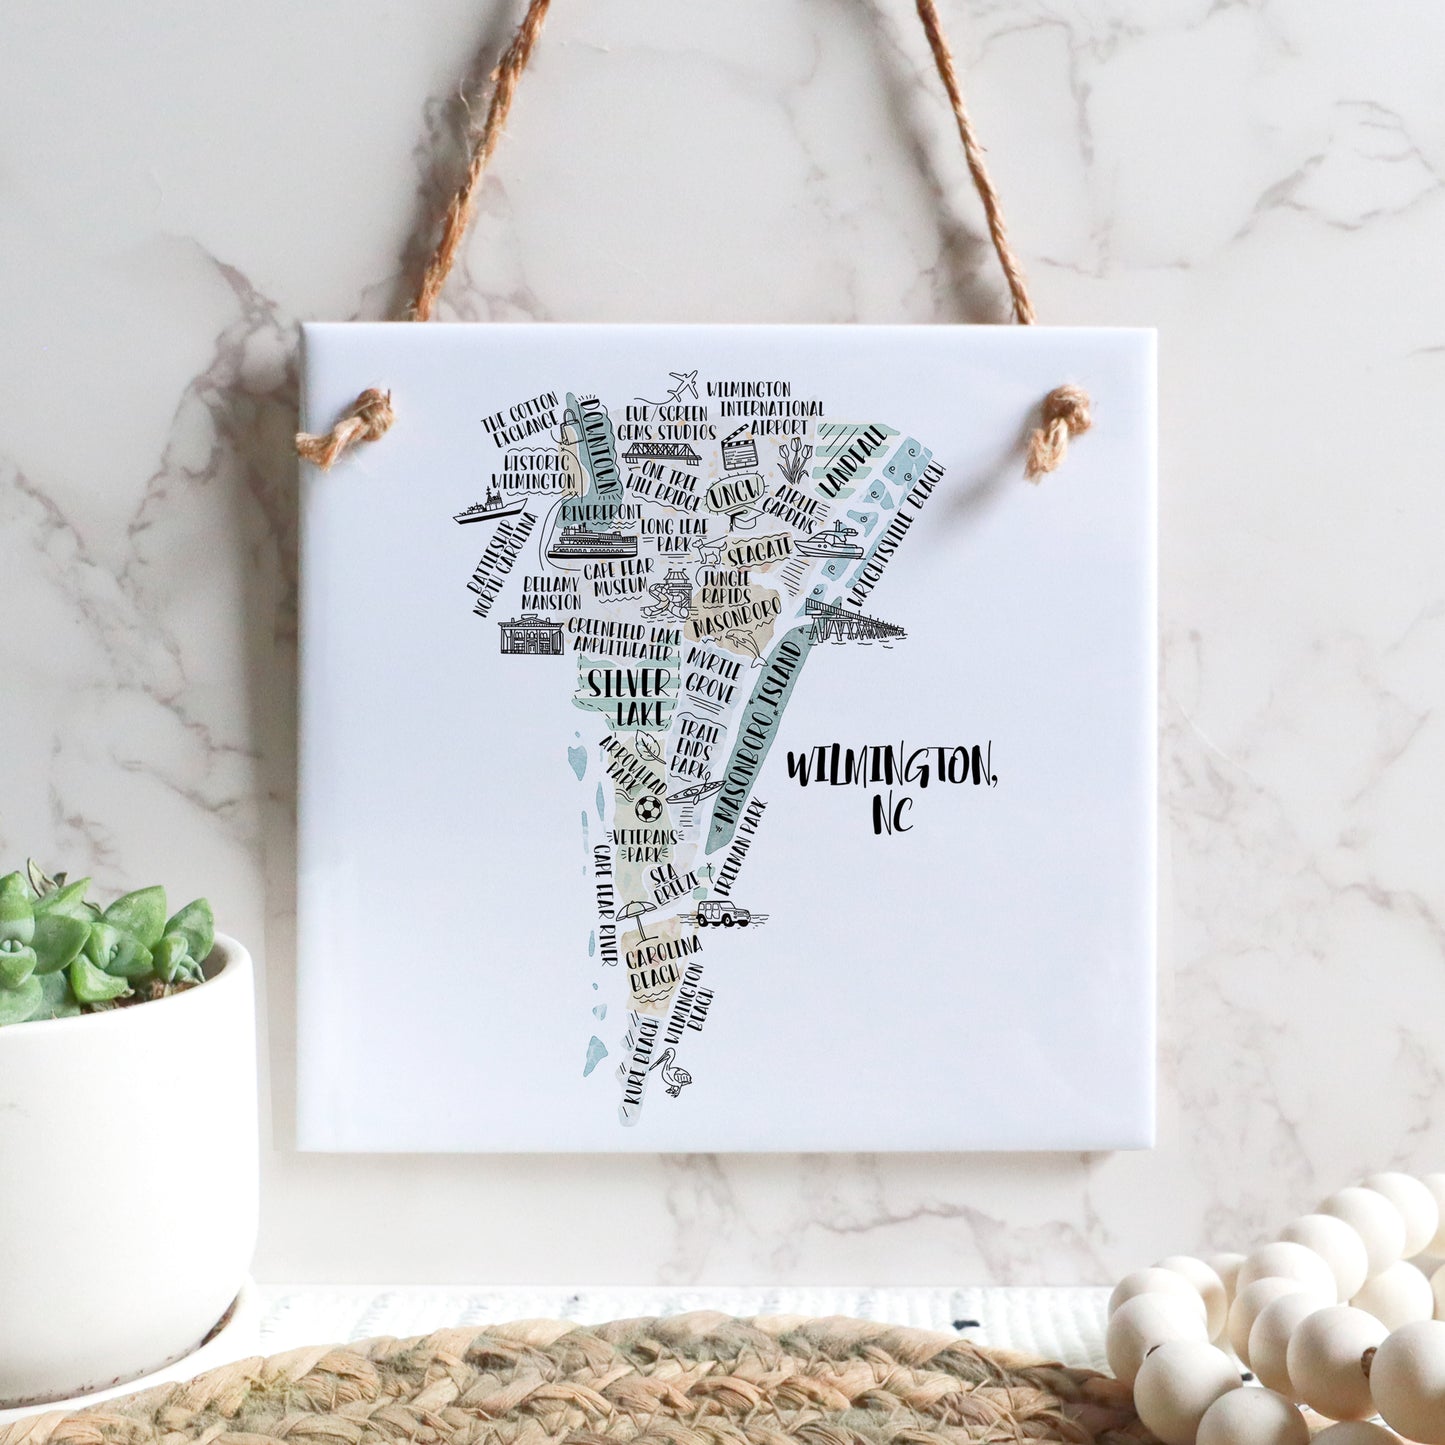 A hand-drawn tourist map of Wilmington North Carolina on a square tile sign hanging on a wall - in the color beige